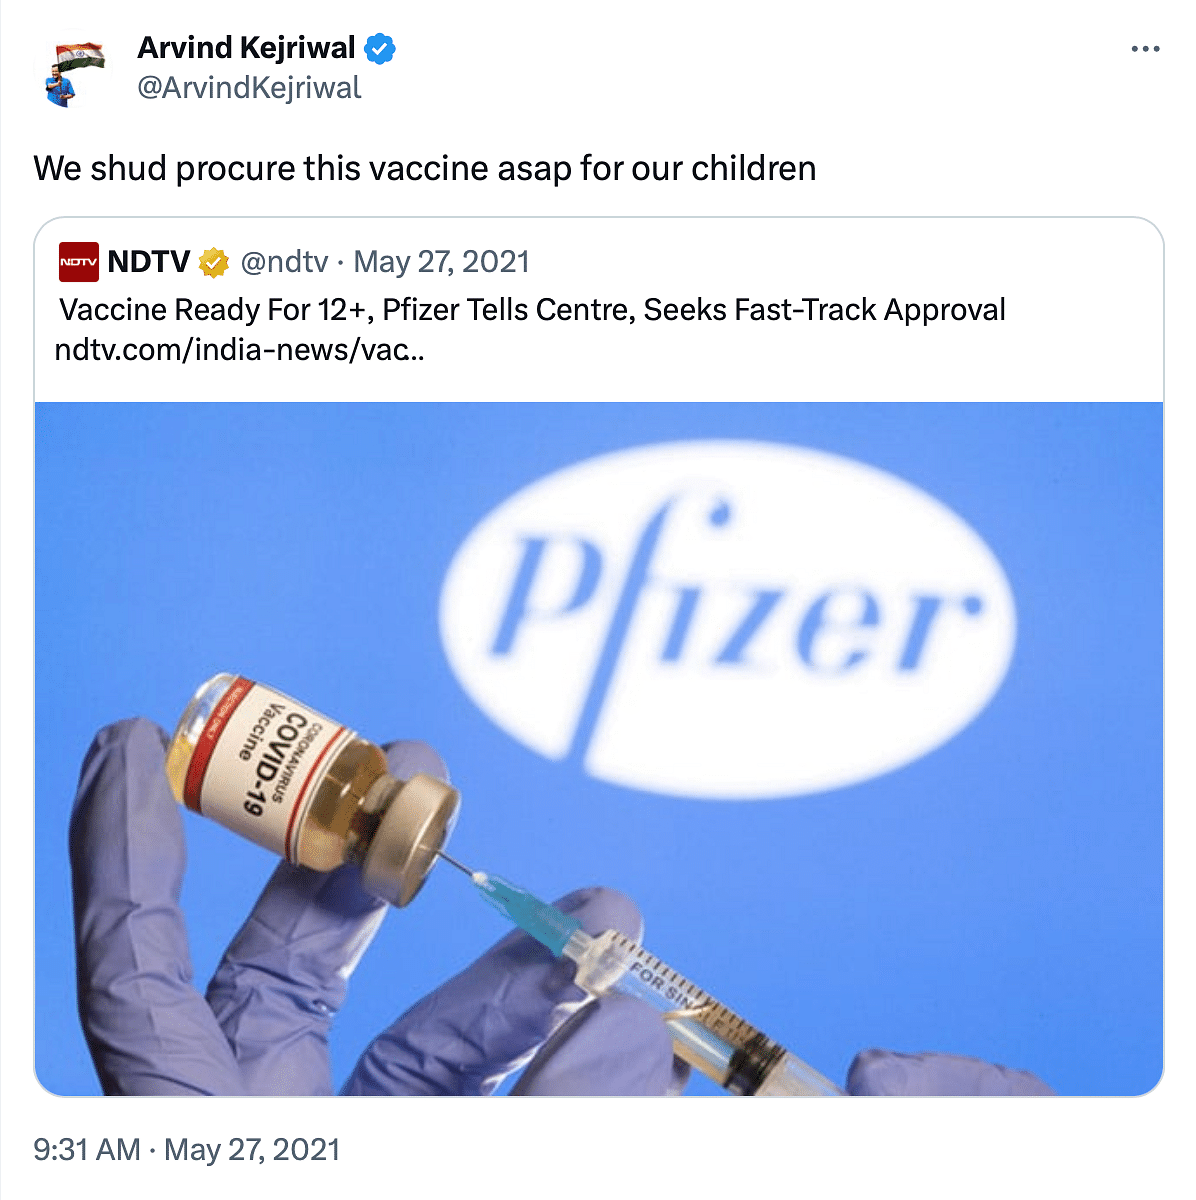 The claim about the Pfizer-BioNTech vaccine is misleading, as the reported effect was pain and local reactions.